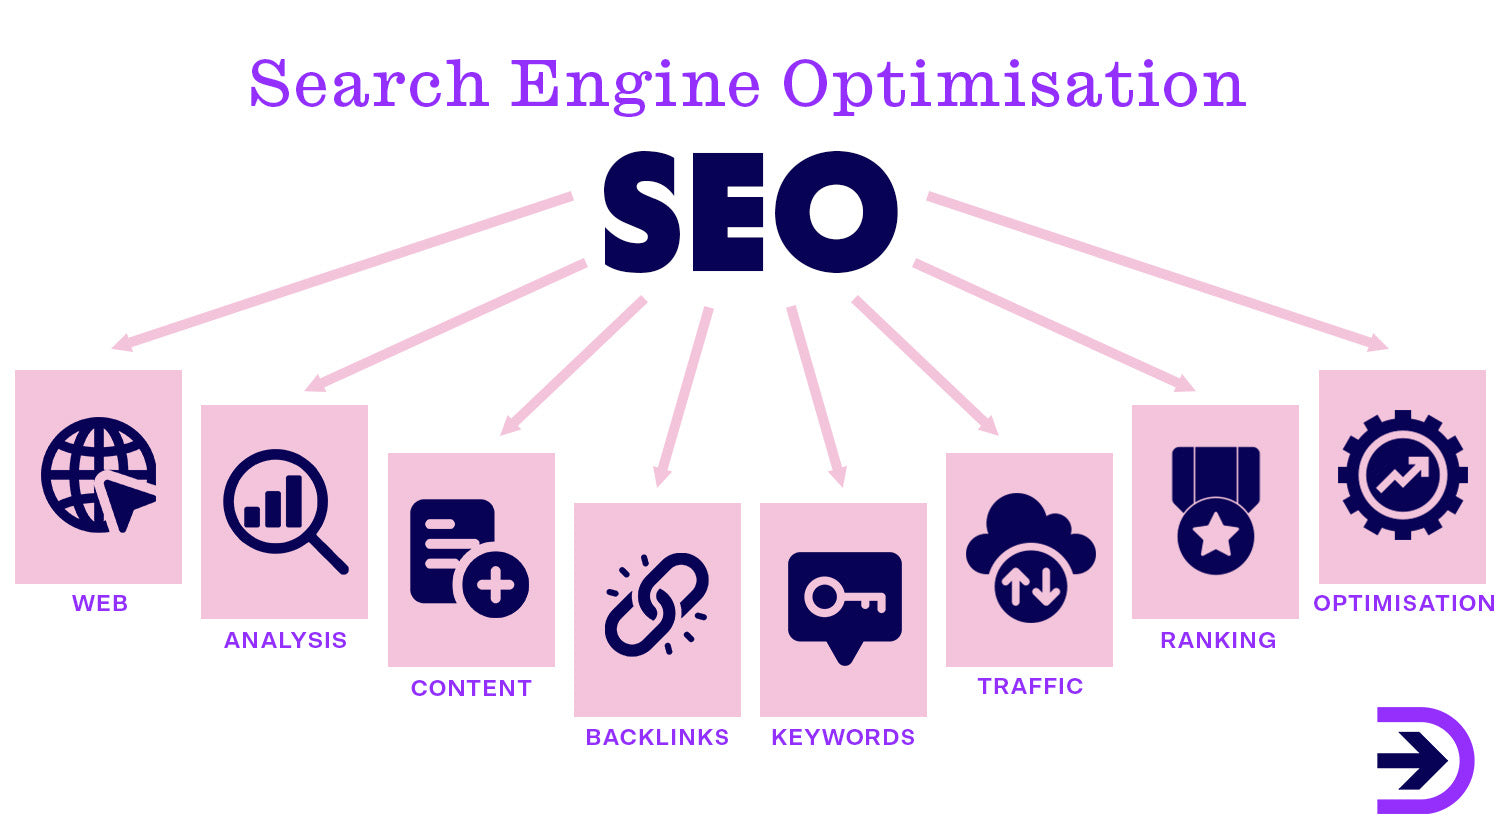 Search engine optimisation is vital to getting your brand more visible online and therefore lead to more sales.